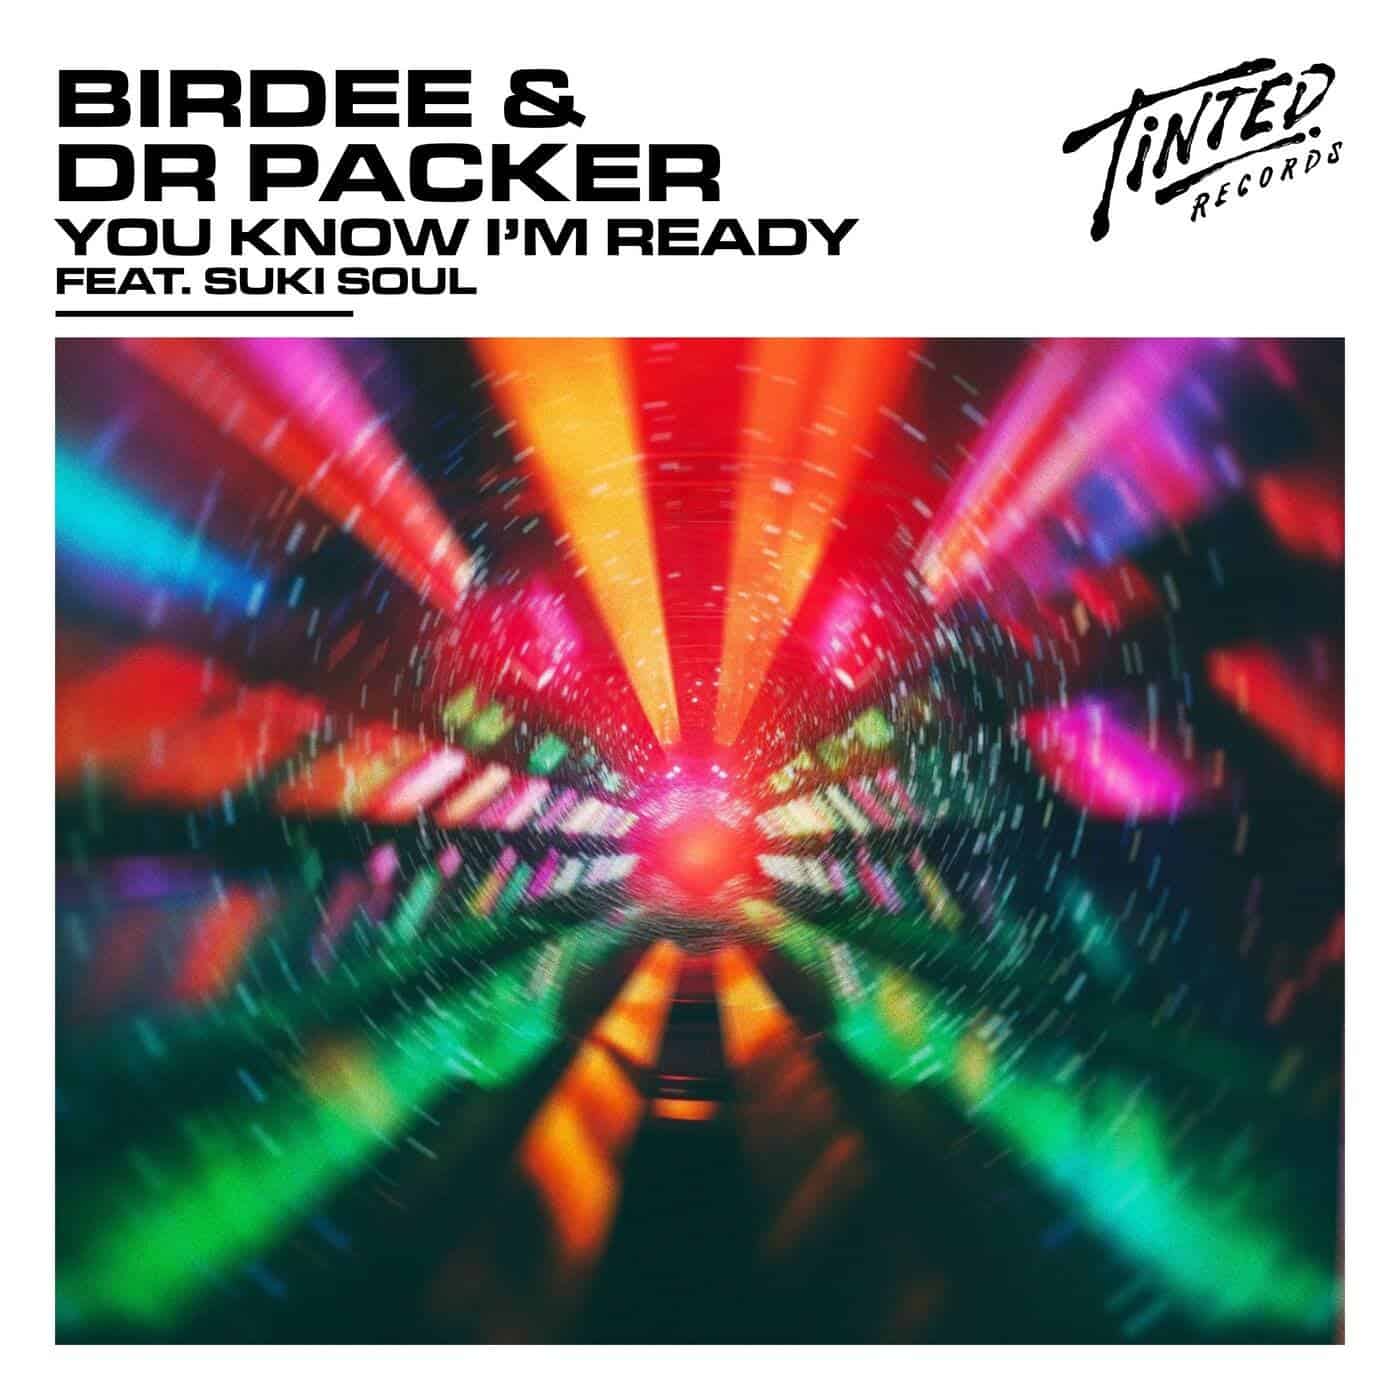 image cover: Birdee, Dr Packer, Suki Soul - You Know I'm Ready (feat. Suki Soul) by Tinted Records